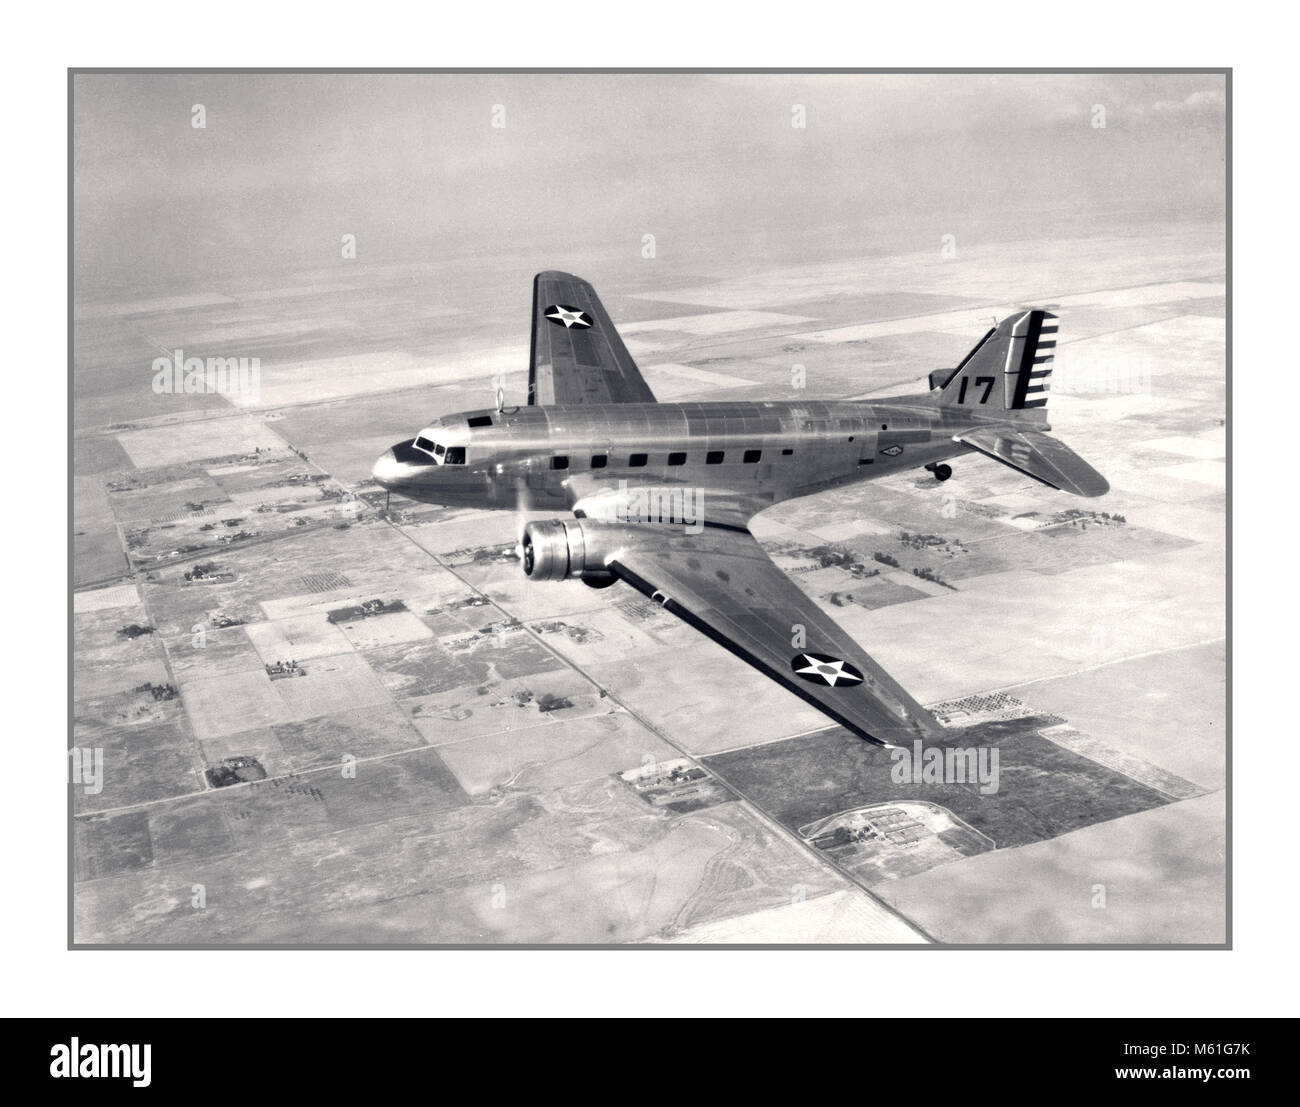 1940’s Vintage WW2 image of an American USAF Douglas C39 transport aircraft type, which was called upon to perform many rigorous transport duties in World War 2, including the urgent evacuation of personnel . Stock Photo